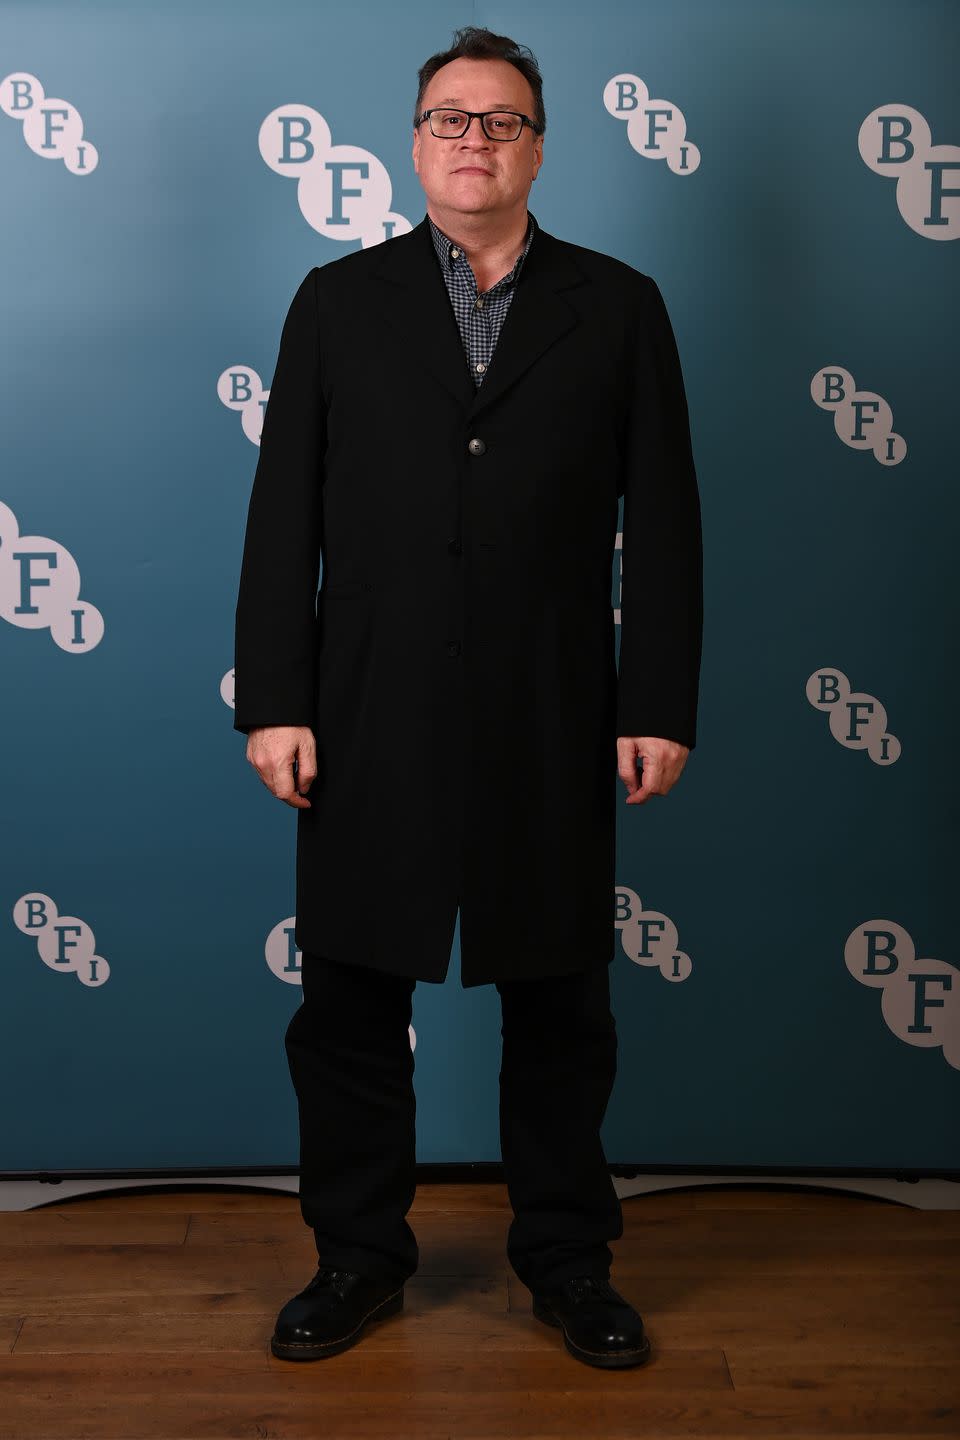 russell t davies january 26, 2023 in london, england photo by eamonn m mccormackgetty images